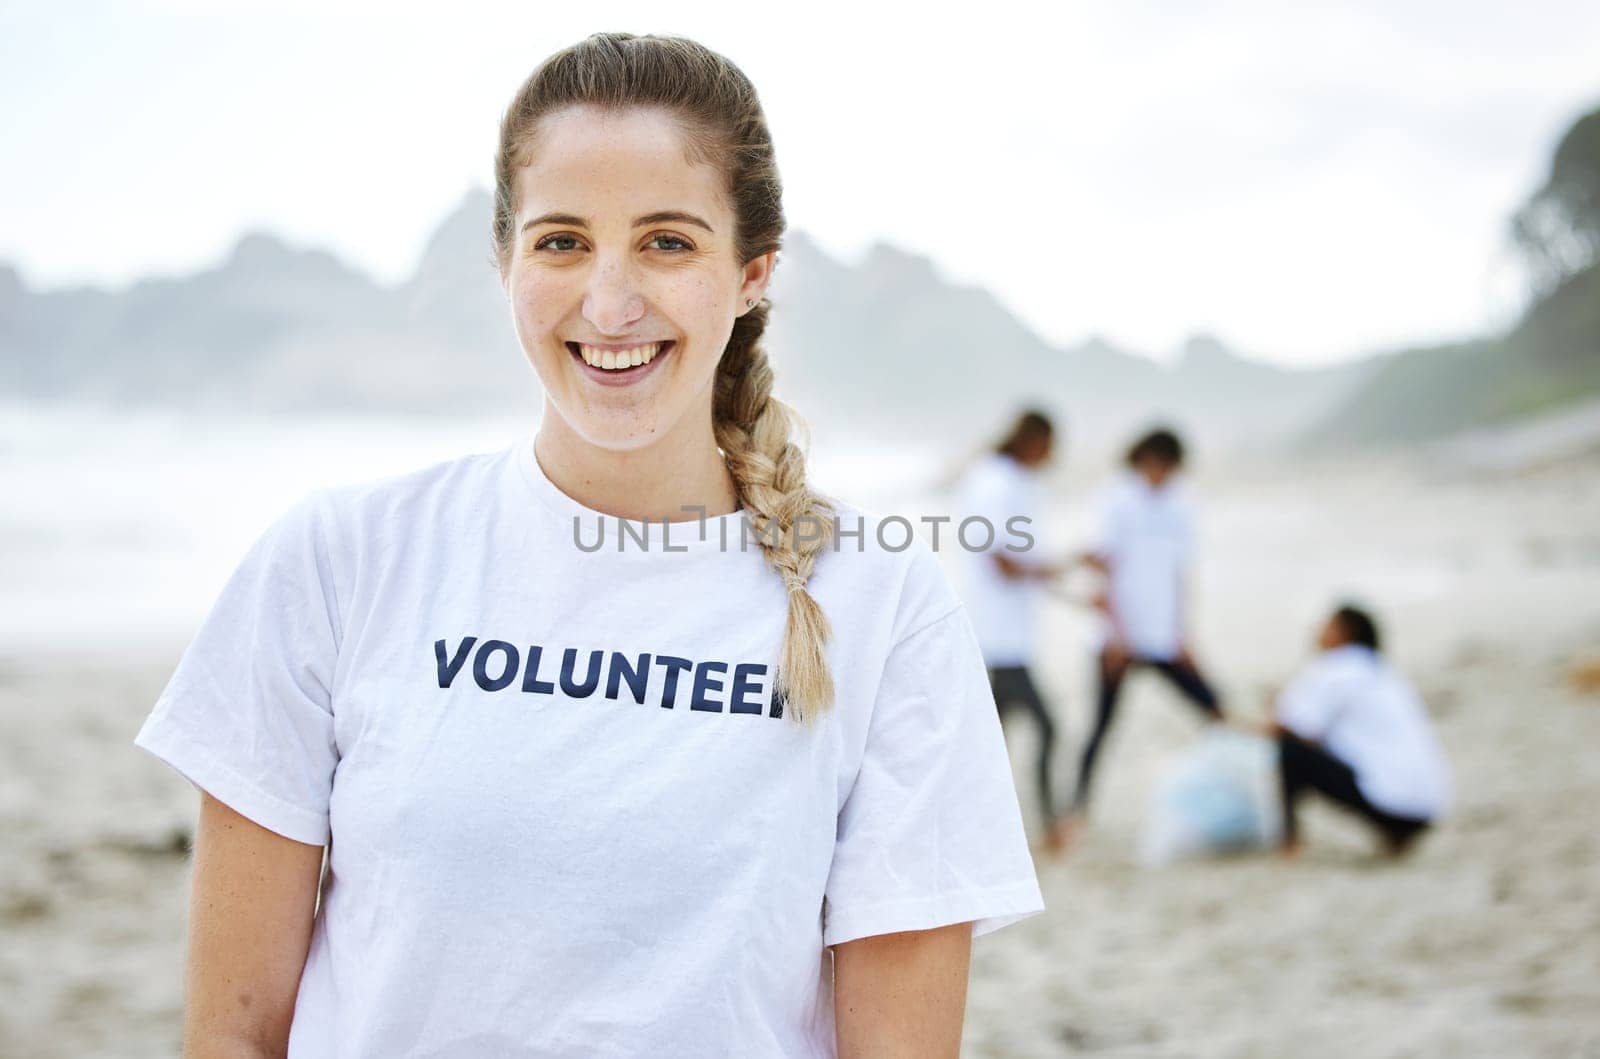 Smile, volunteer portrait and woman at beach for cleaning, recycling or environmental sustainability. Earth day, happy face and proud female for community service, charity and climate change at ocean.